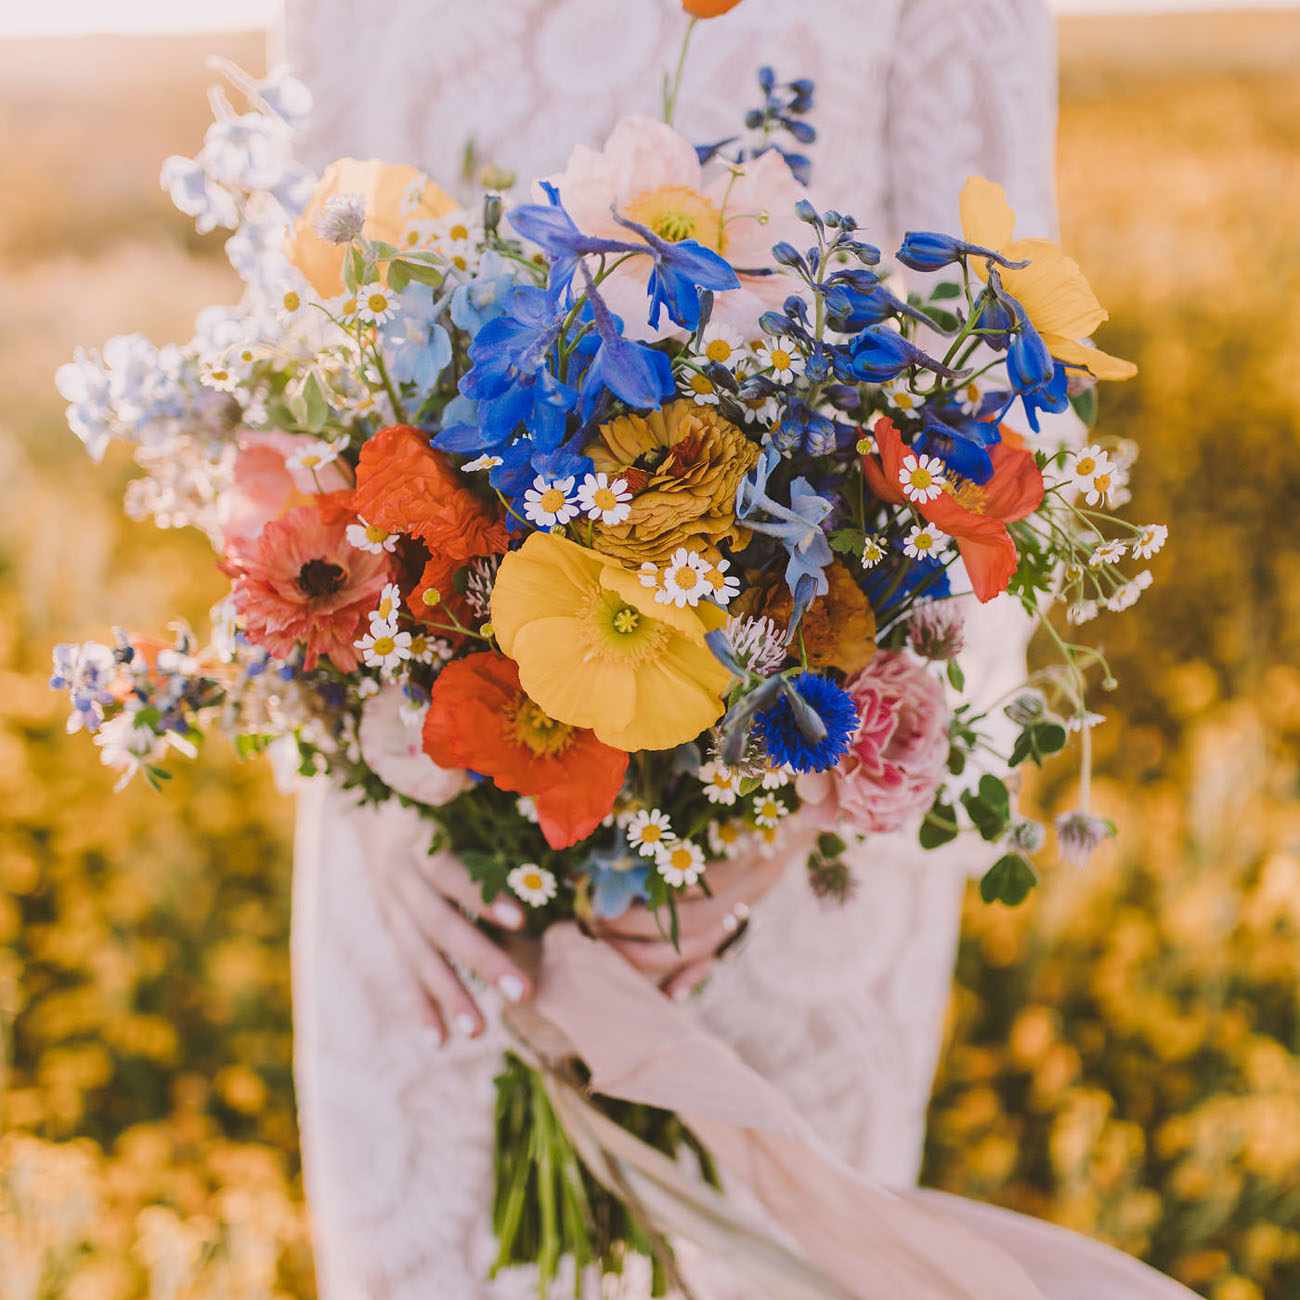 How To Make A Wildflower Bouquet